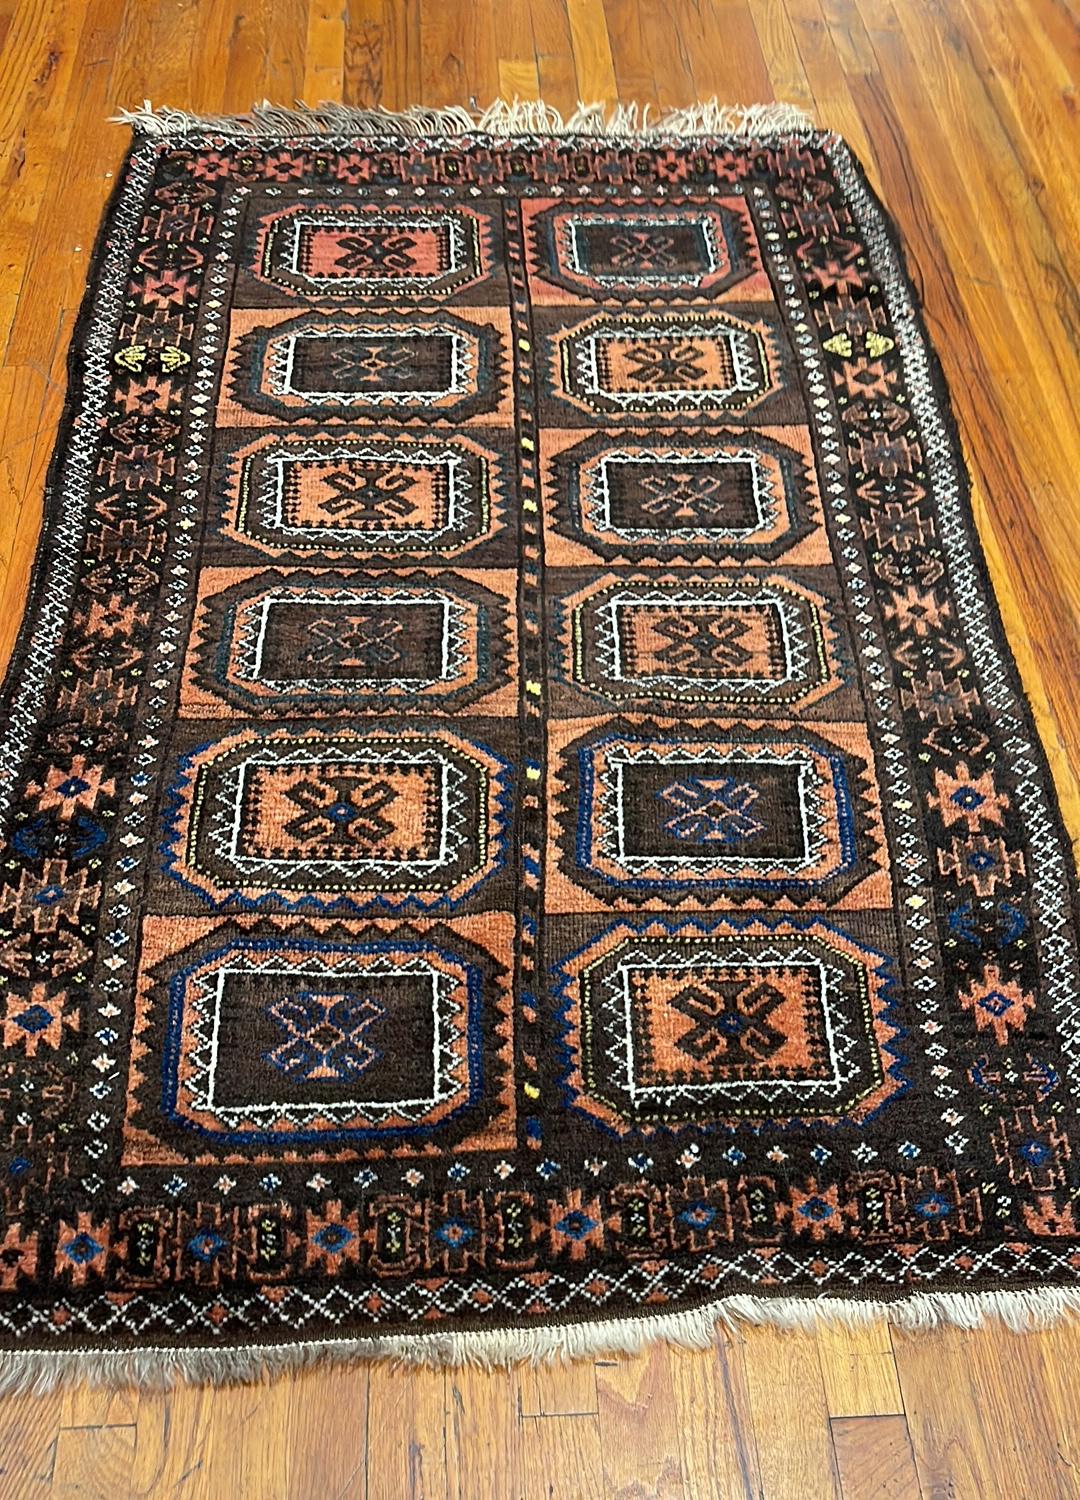 This rug is an Afghan Rug which is a workshop carpet woven by a weaving house in Afghanistan. Afghanistan has a rich history in the craft of rug-making. The design in this piece is tribal allover design. The color combination in this piece is brown,